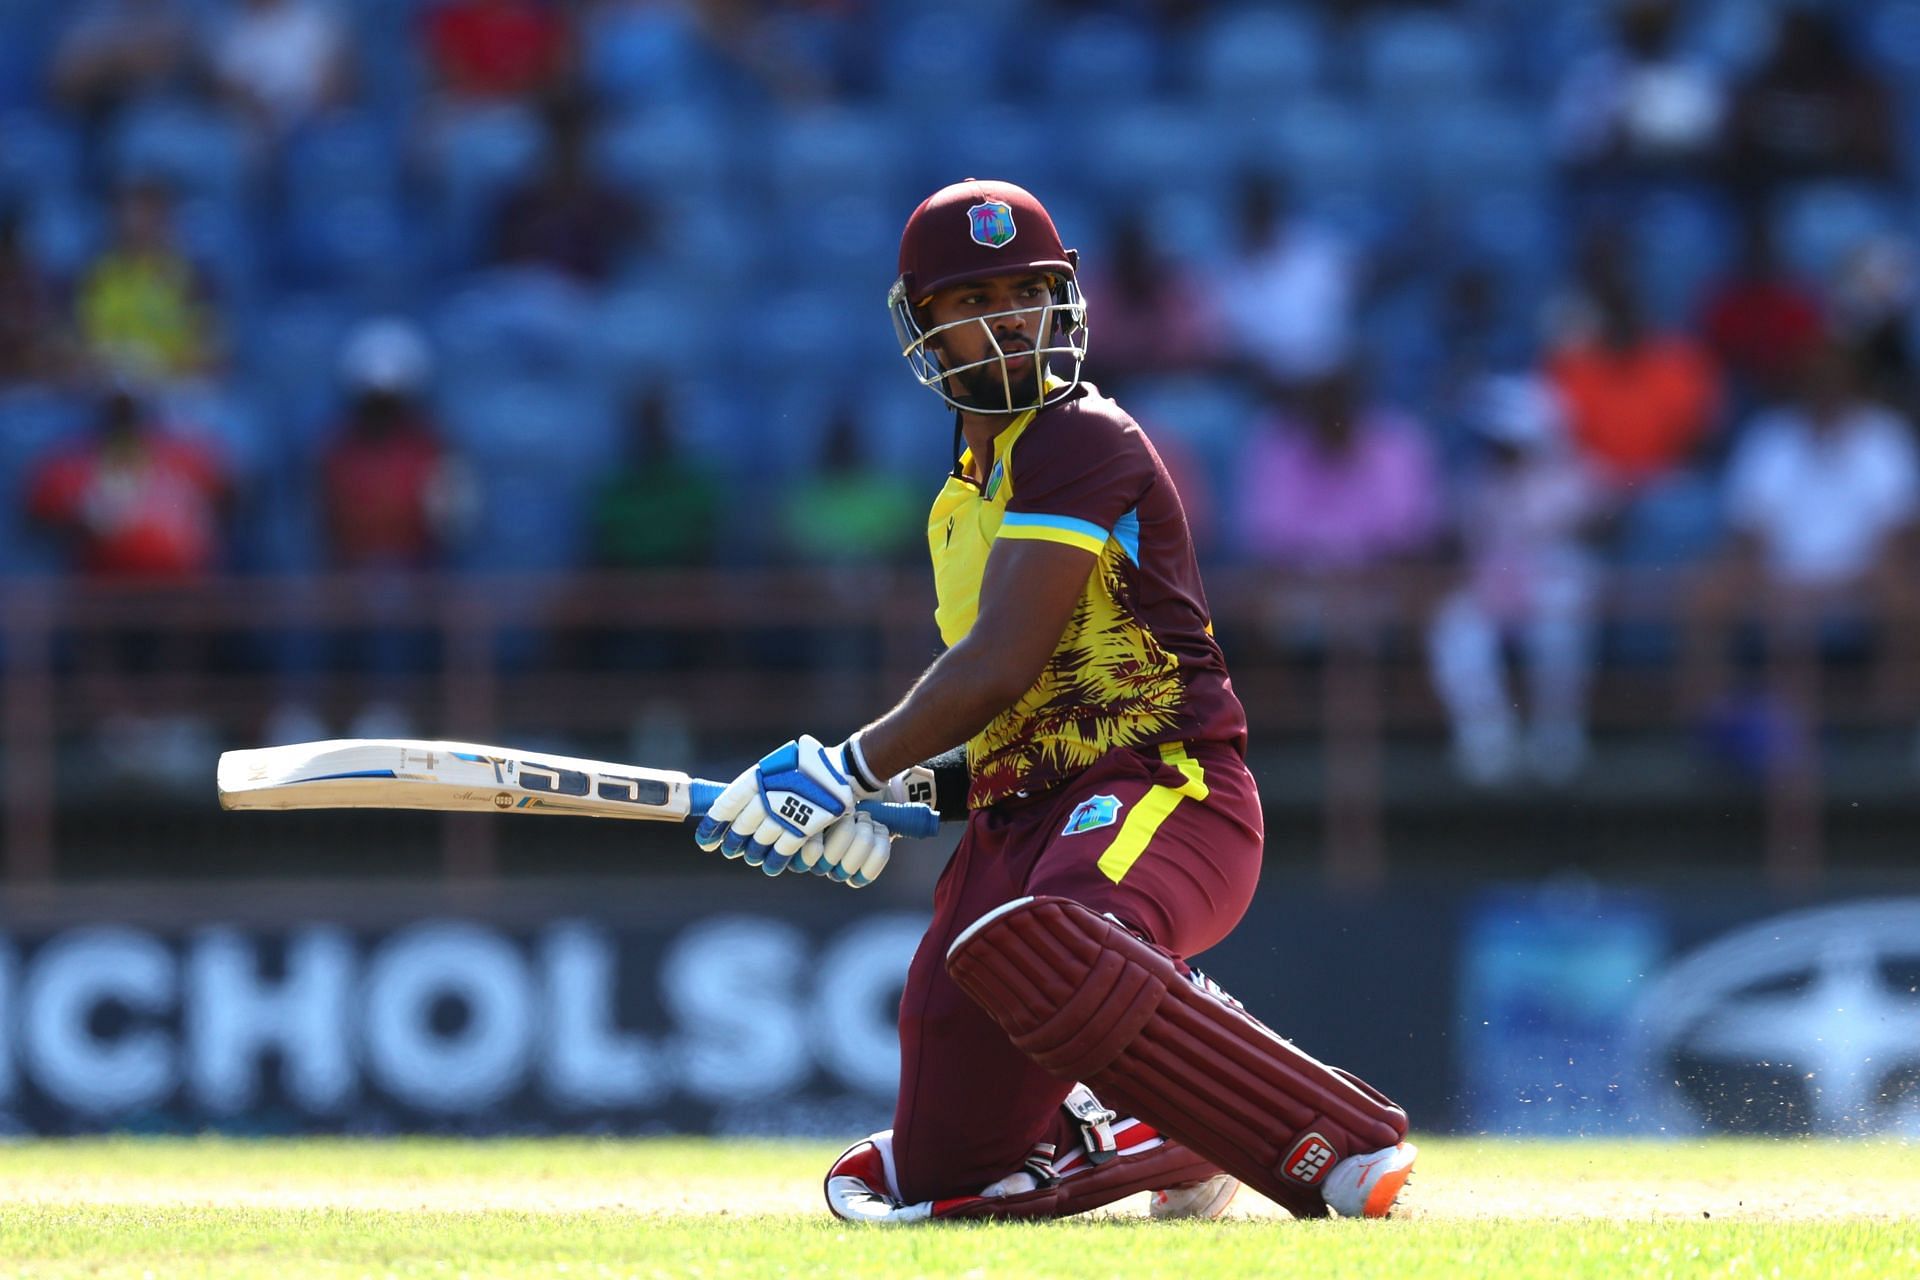 Nicholas Pooran has really improved against spin